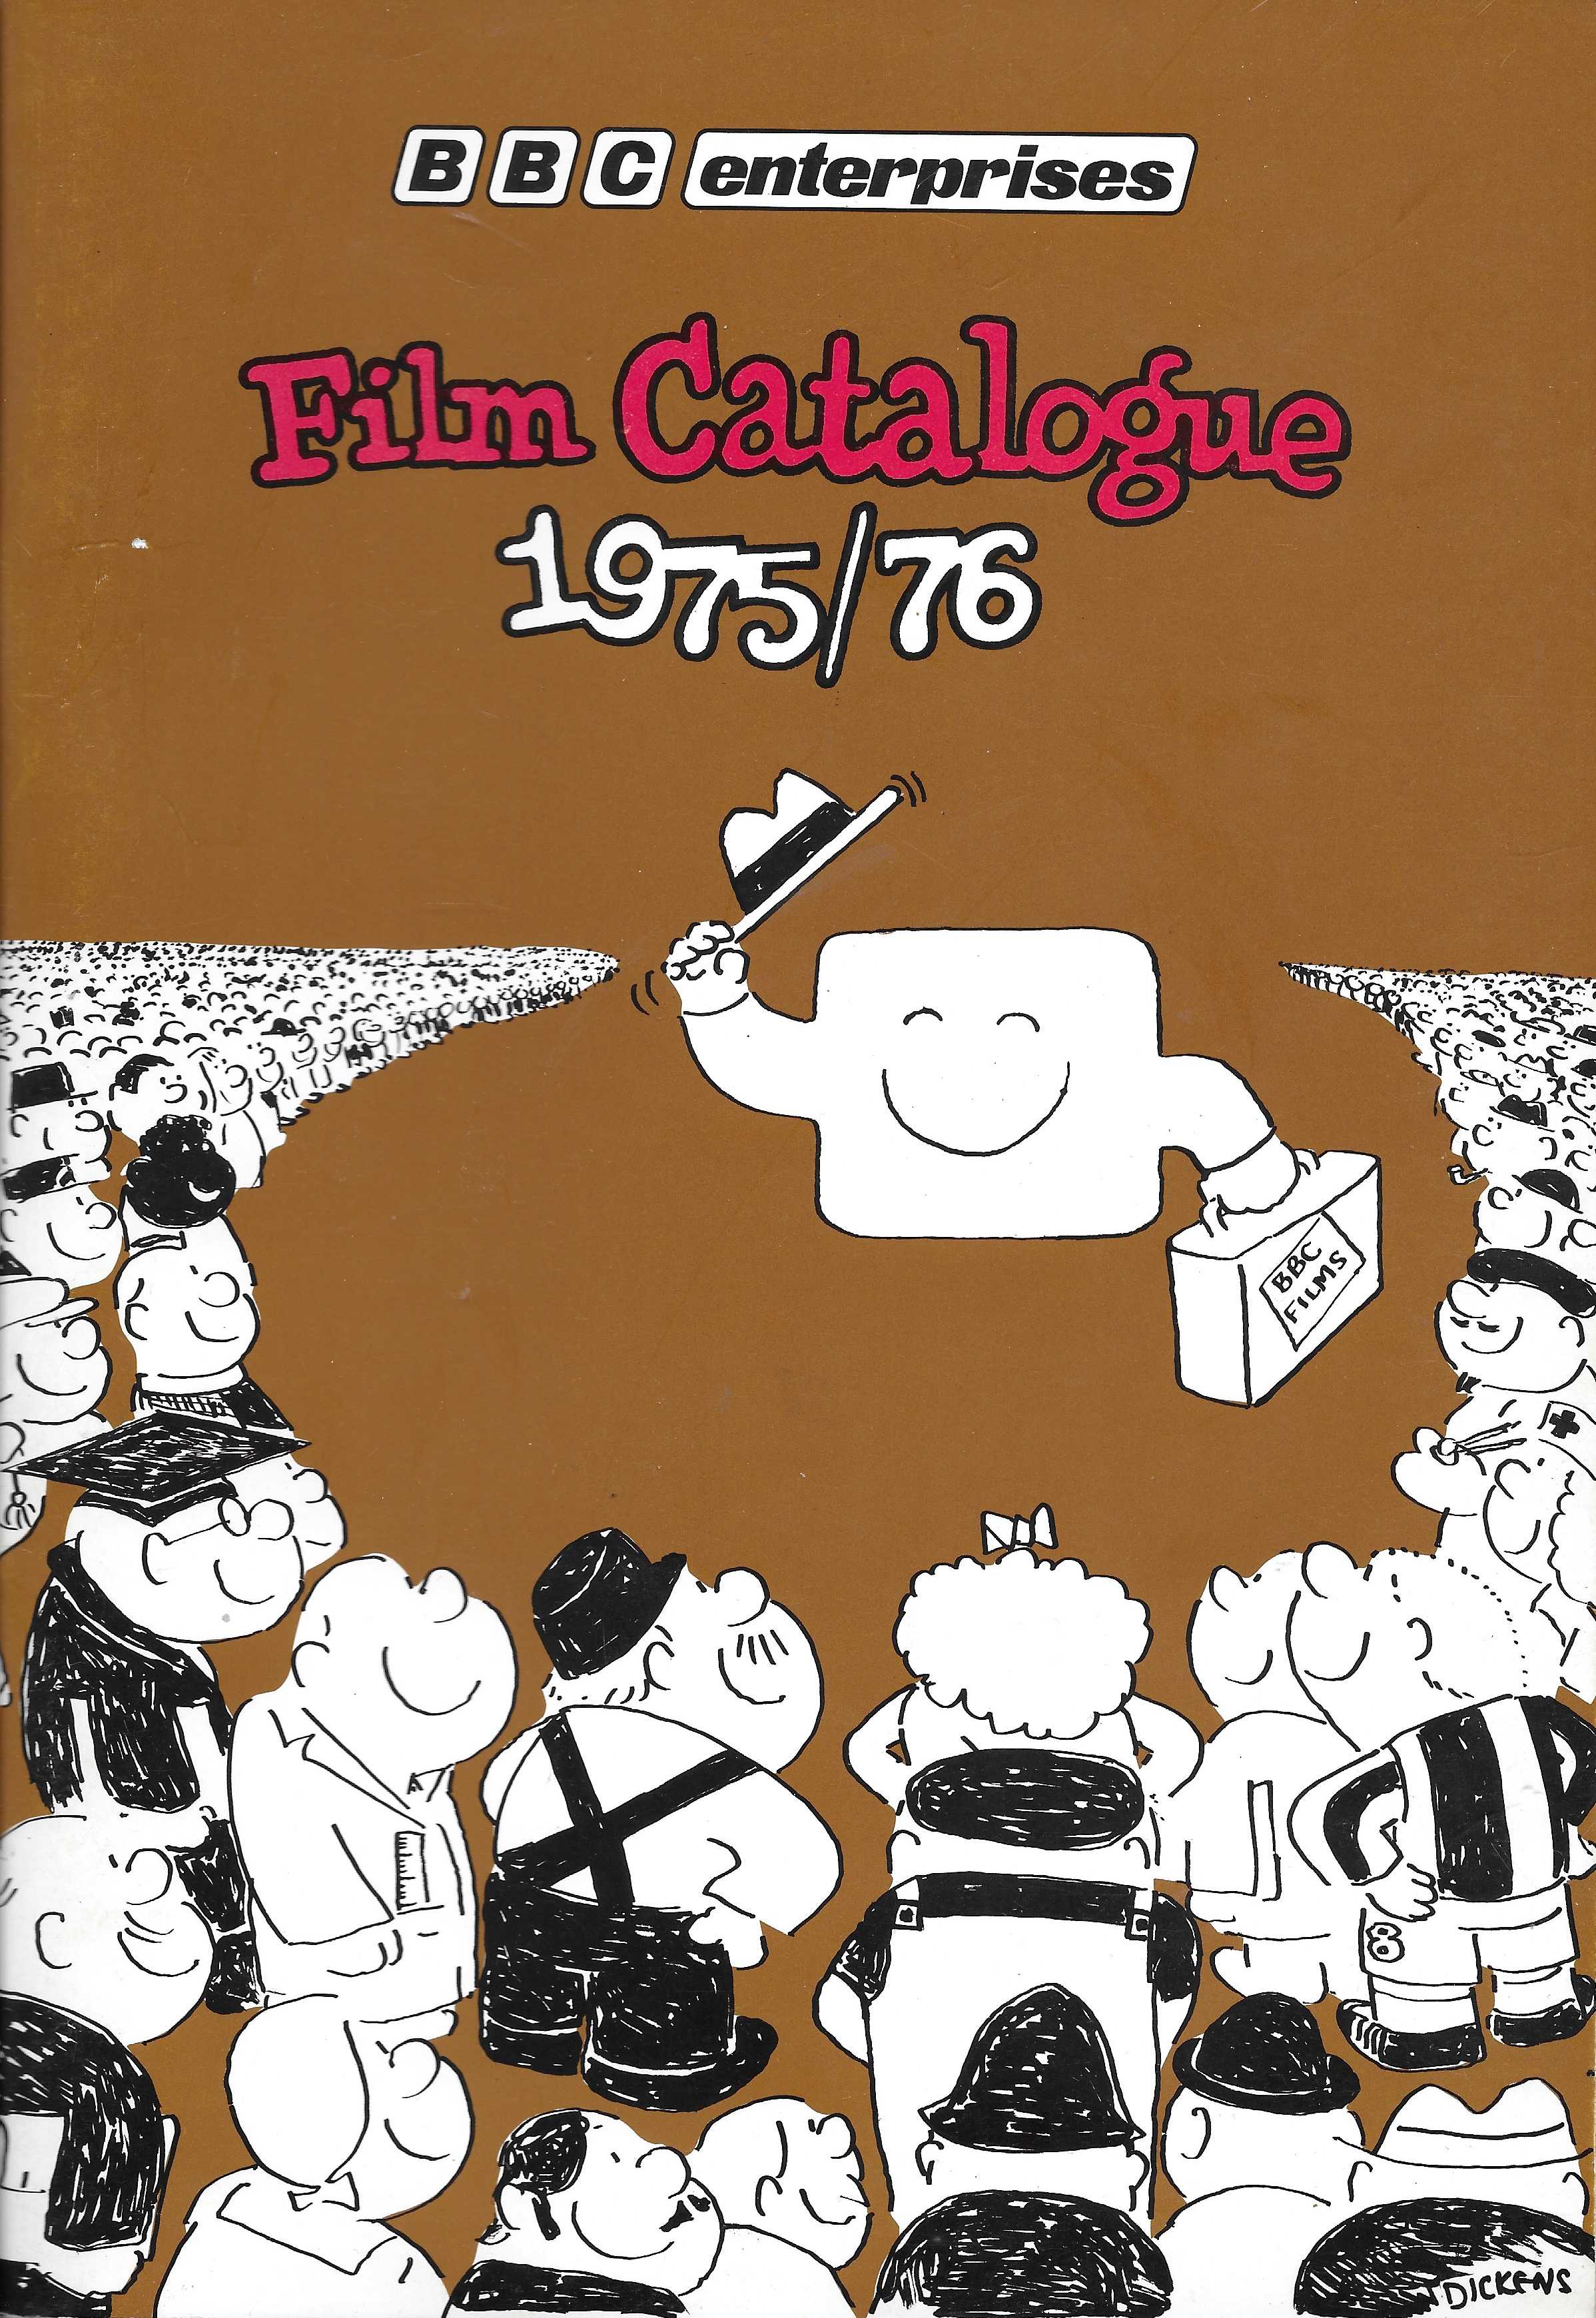 Front cover of catalogue BBC film catalogue 1975/6